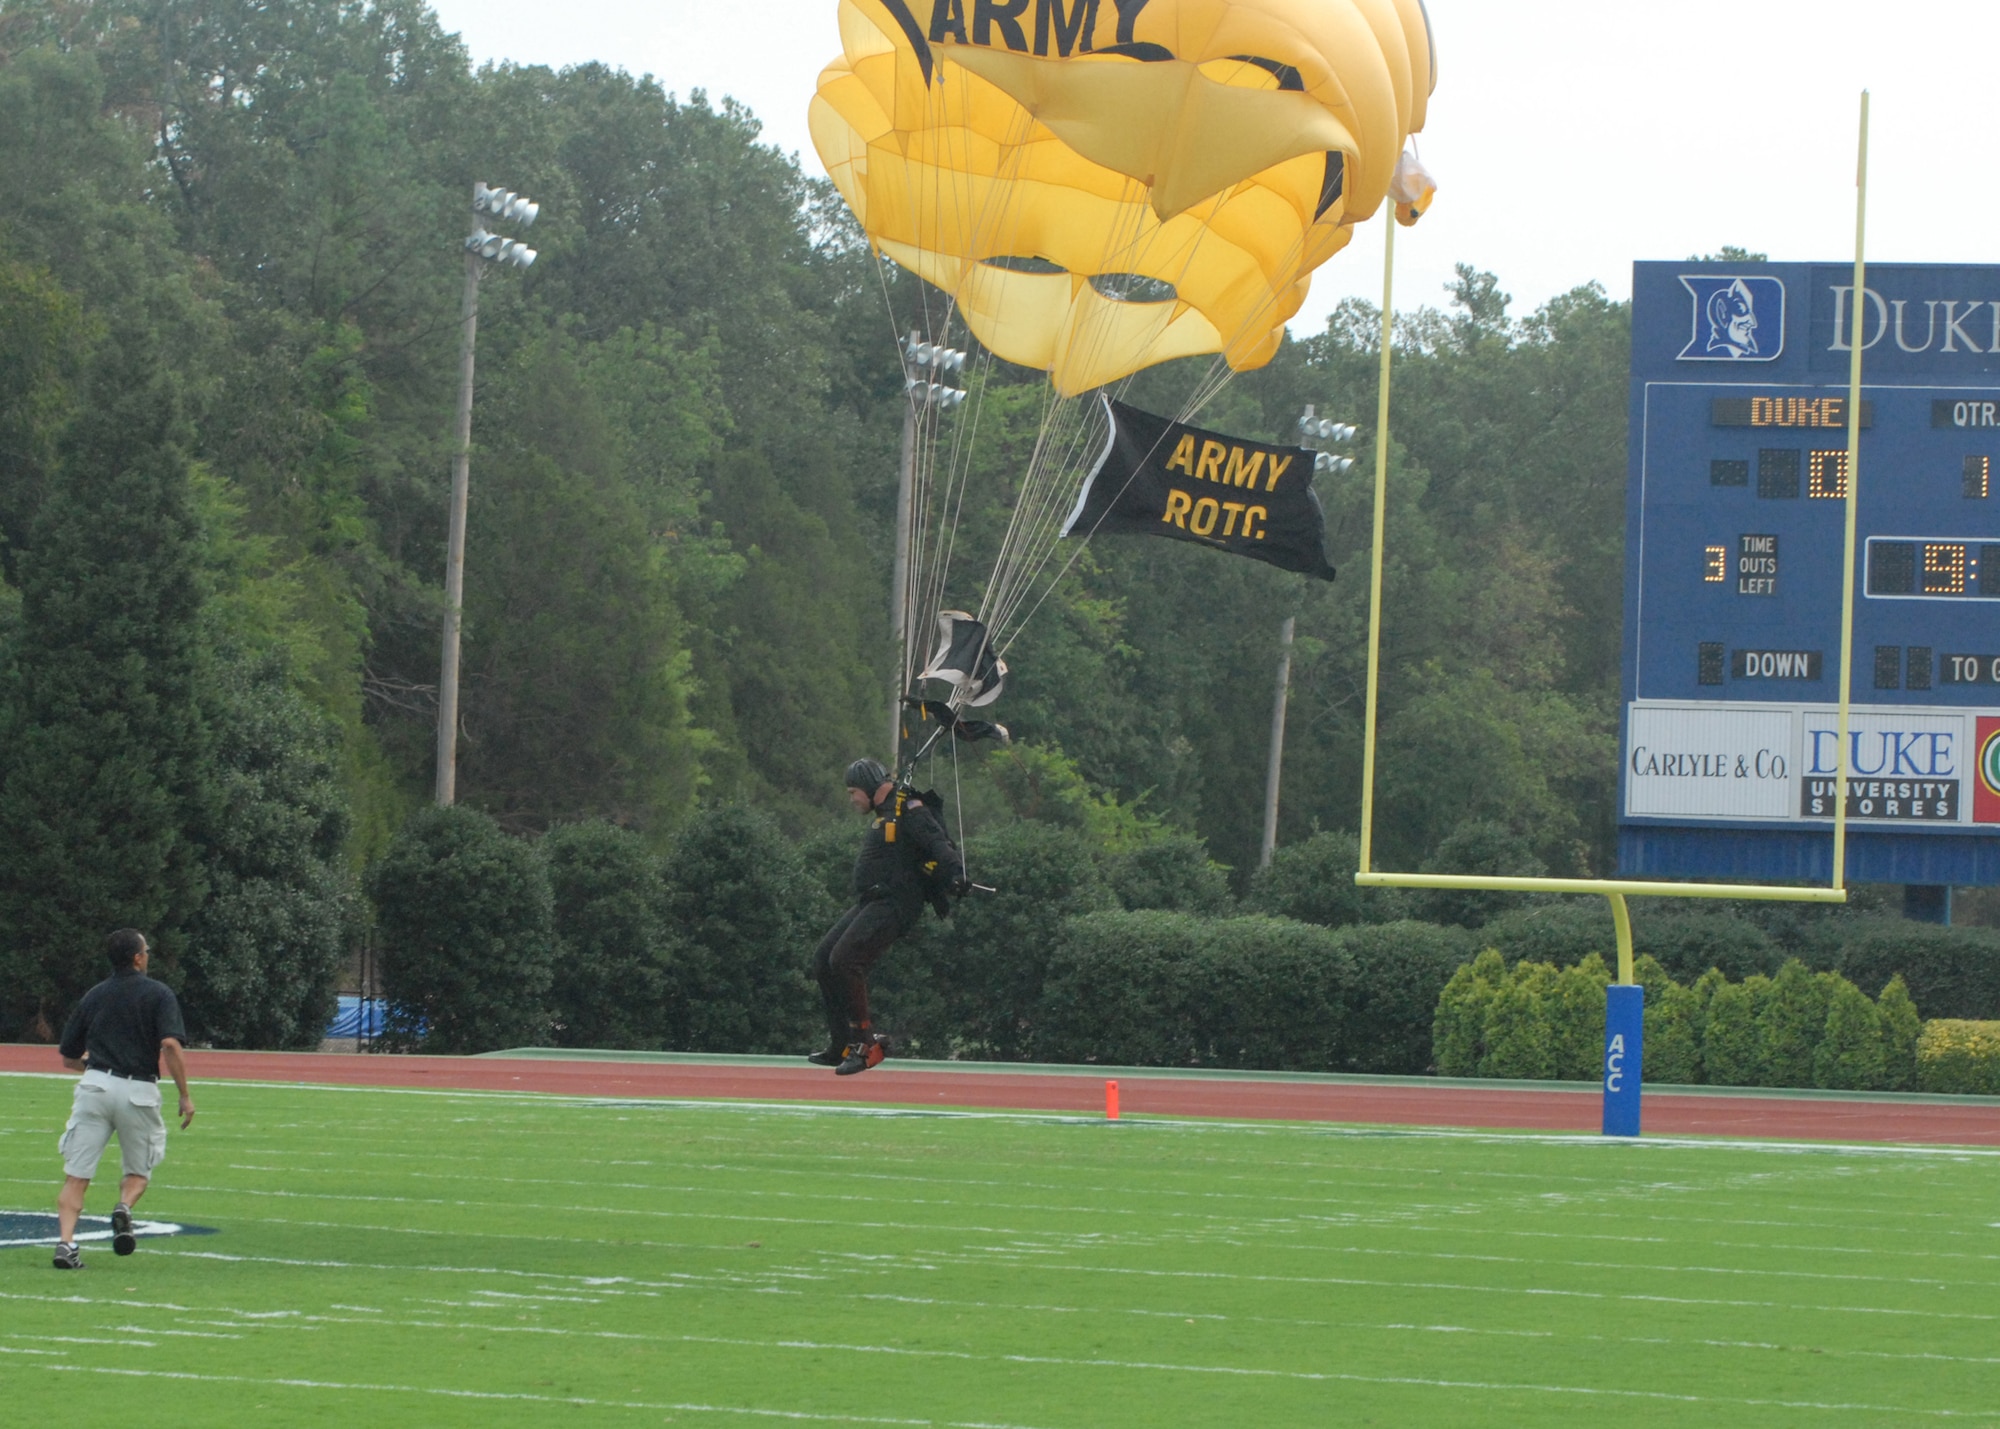 A member of the Army Golden Knights Parachute Team from Fort Bragg, N.C., approaches the target zone while flying the Army Reserve Offficer Training Corps flag Sept. 1 at Wallace Wade Stadium, Durham, N.C. Two members of the Golden Knights landed midfield to kick off the start of Duke's college football season as part of Duke's Military Appreciation Game. (U.S. Air Force photo/Staff Sgt. Jon LaDue)